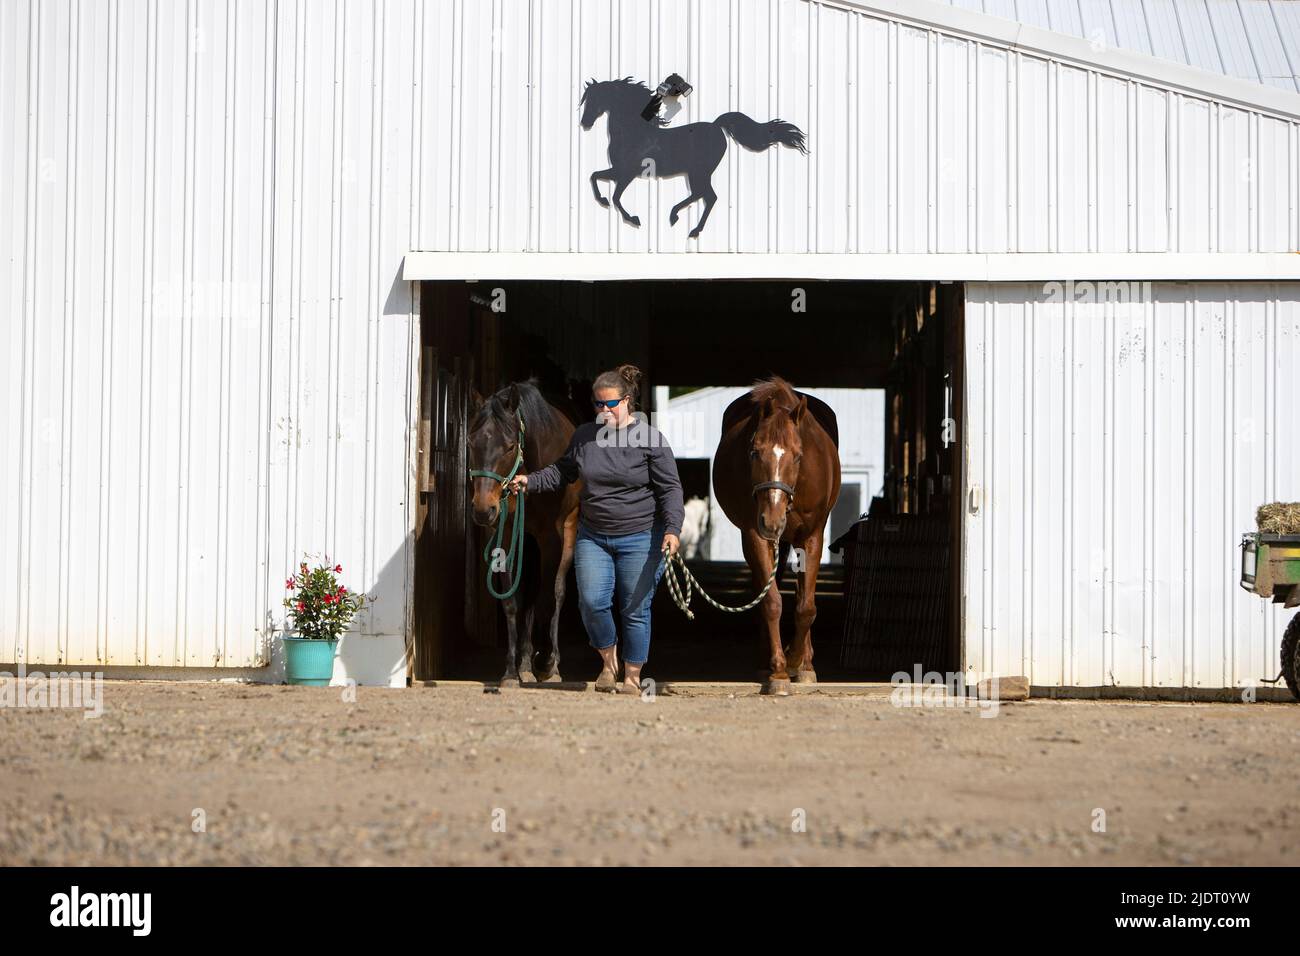 Woman leading two horses out of a barn. Stock Photo